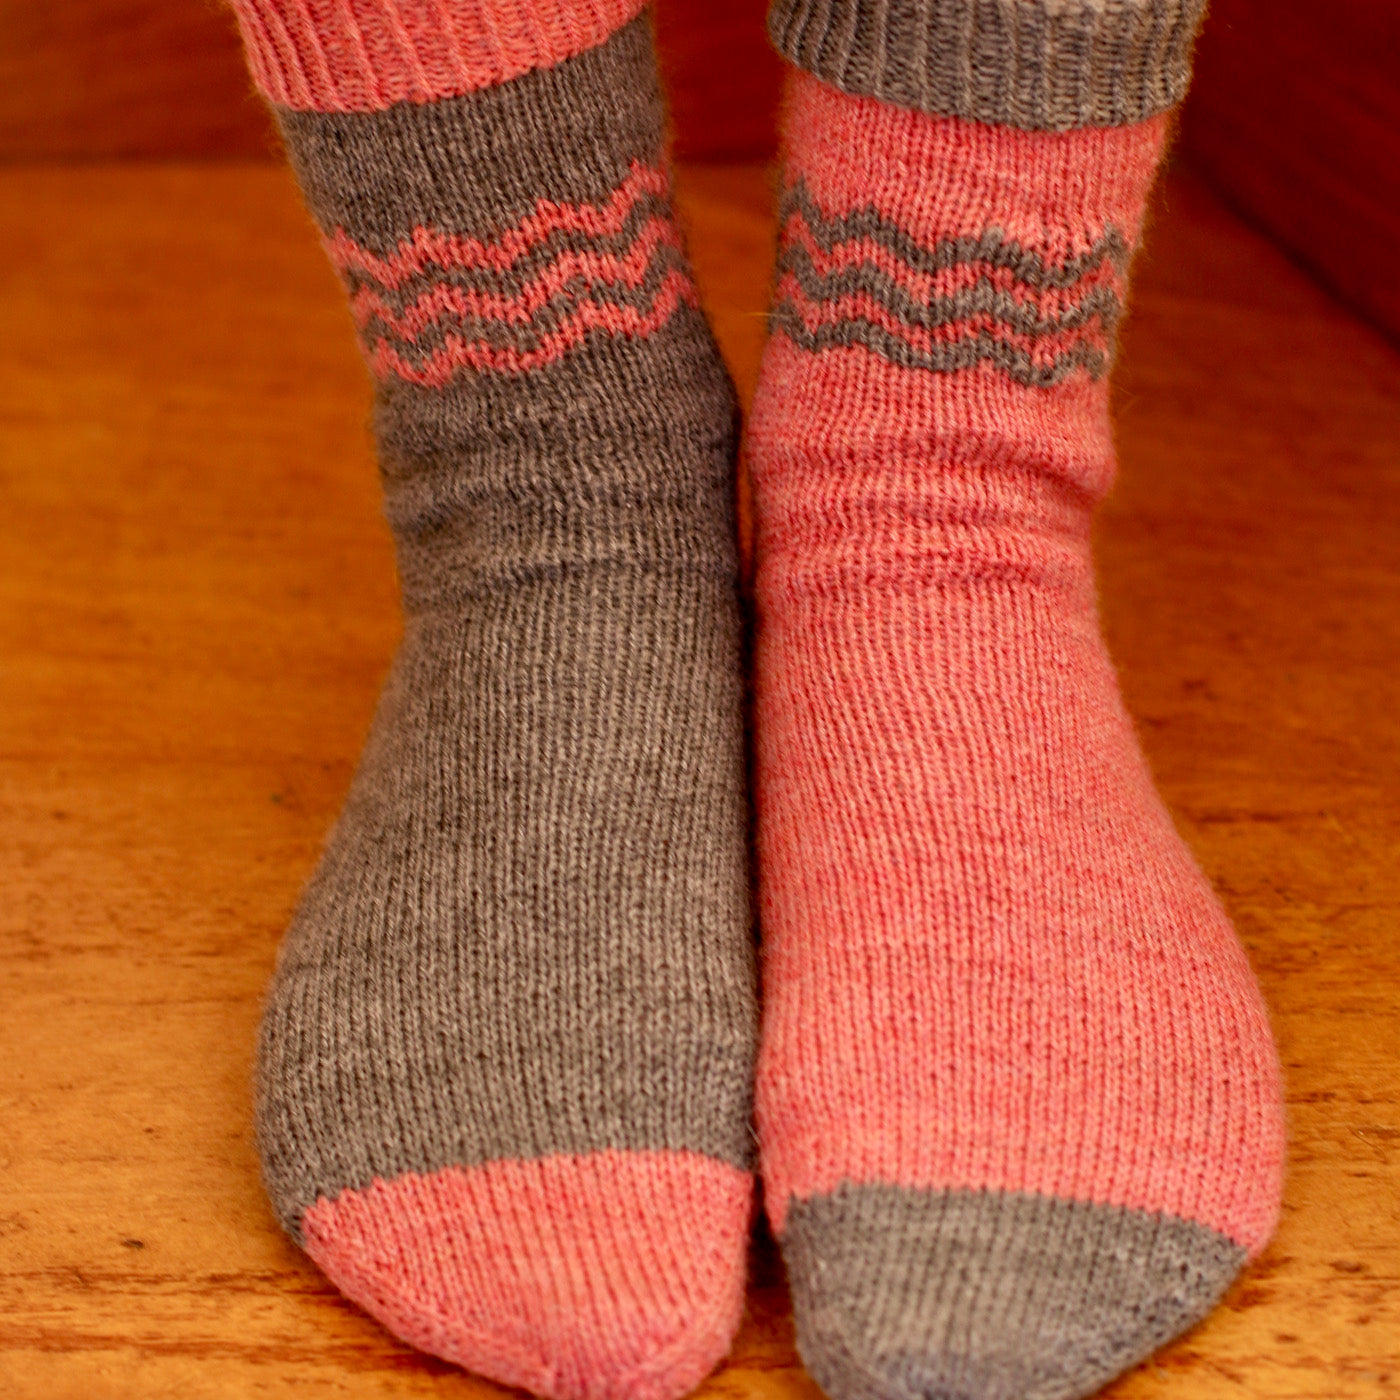 The Sock Series: Stretchy cast ons for handmade socks - Curious